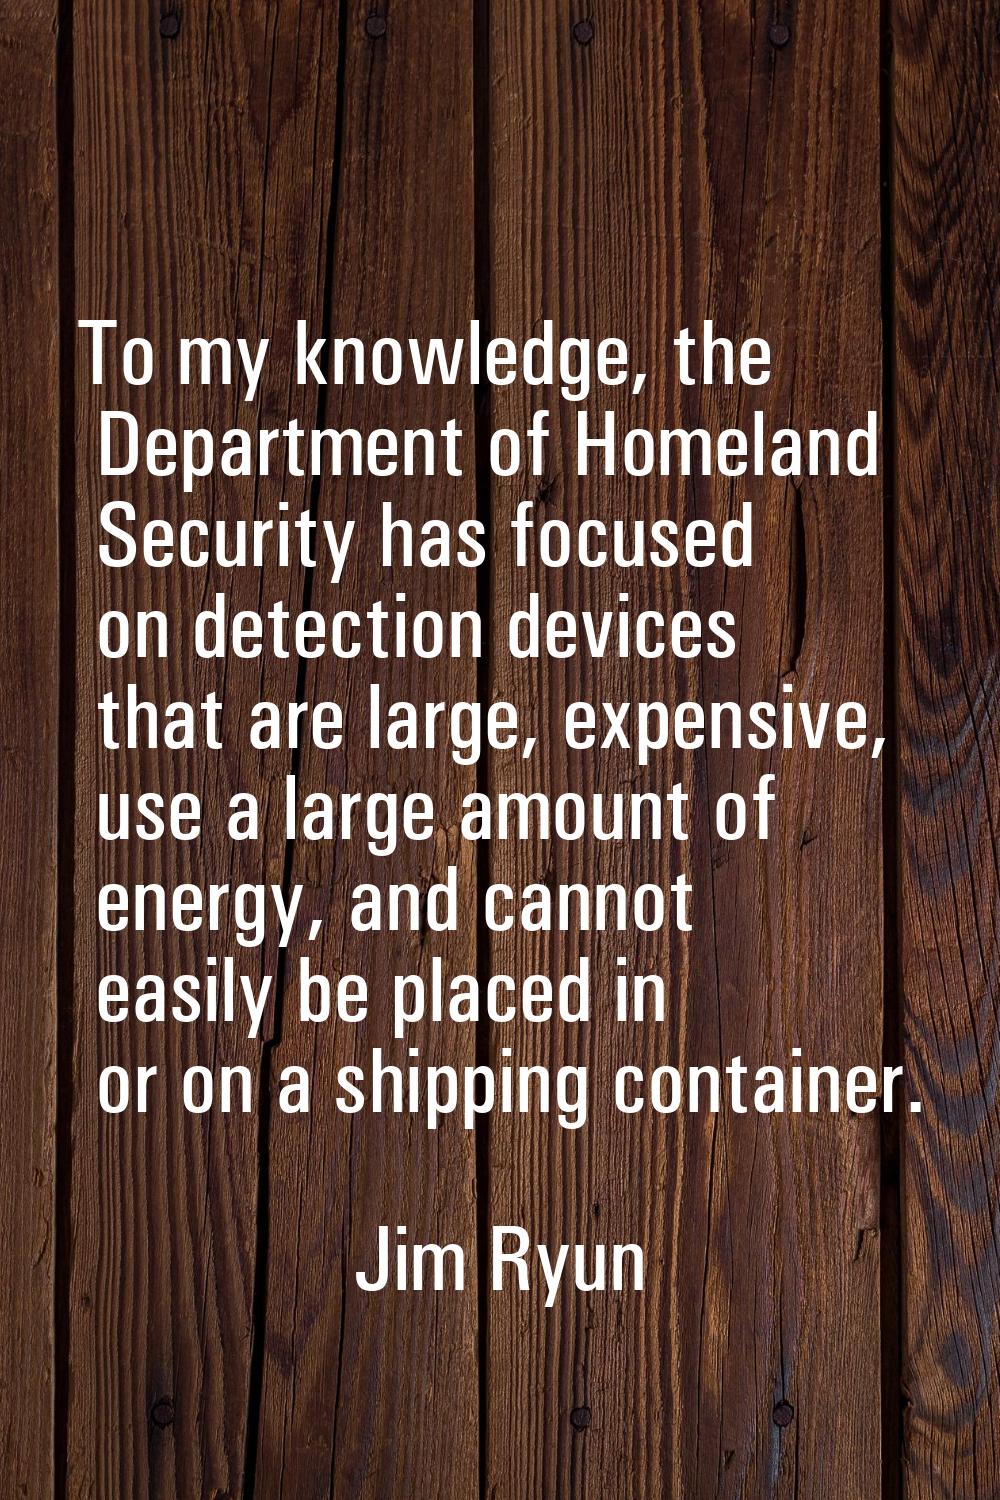 To my knowledge, the Department of Homeland Security has focused on detection devices that are larg